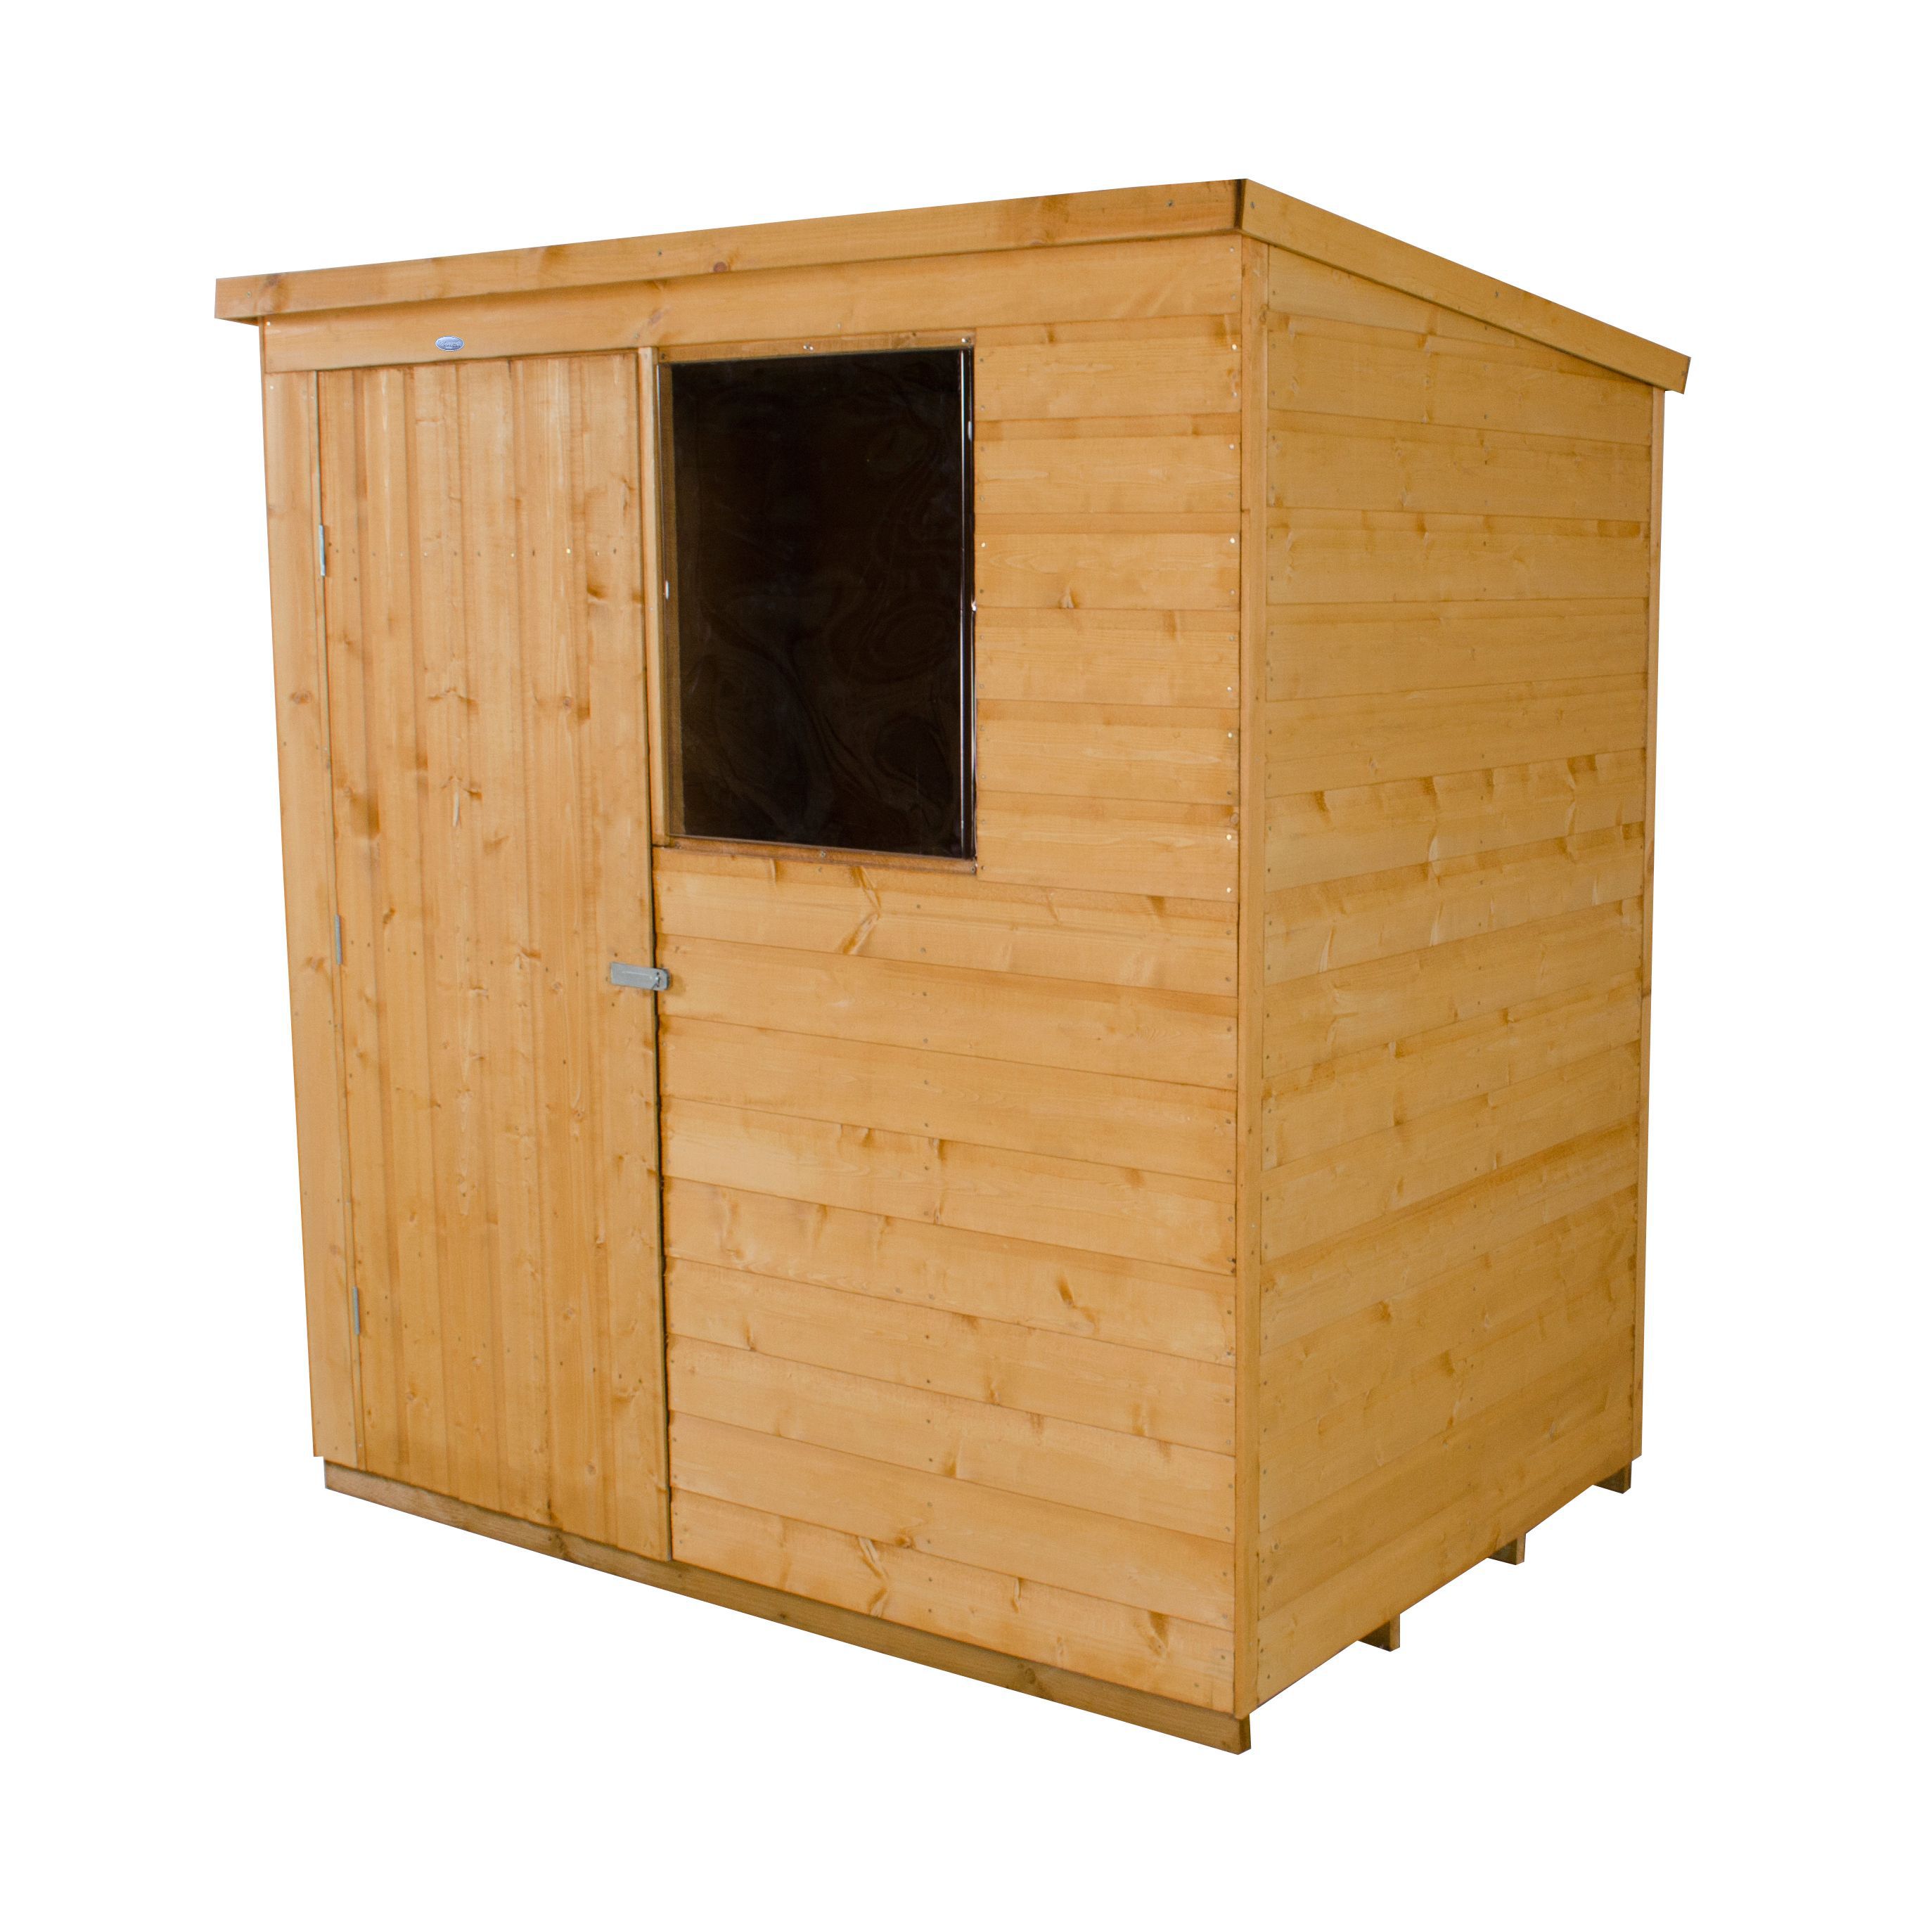 Forest Garden 6x4 Pent Shiplap Wooden Shed